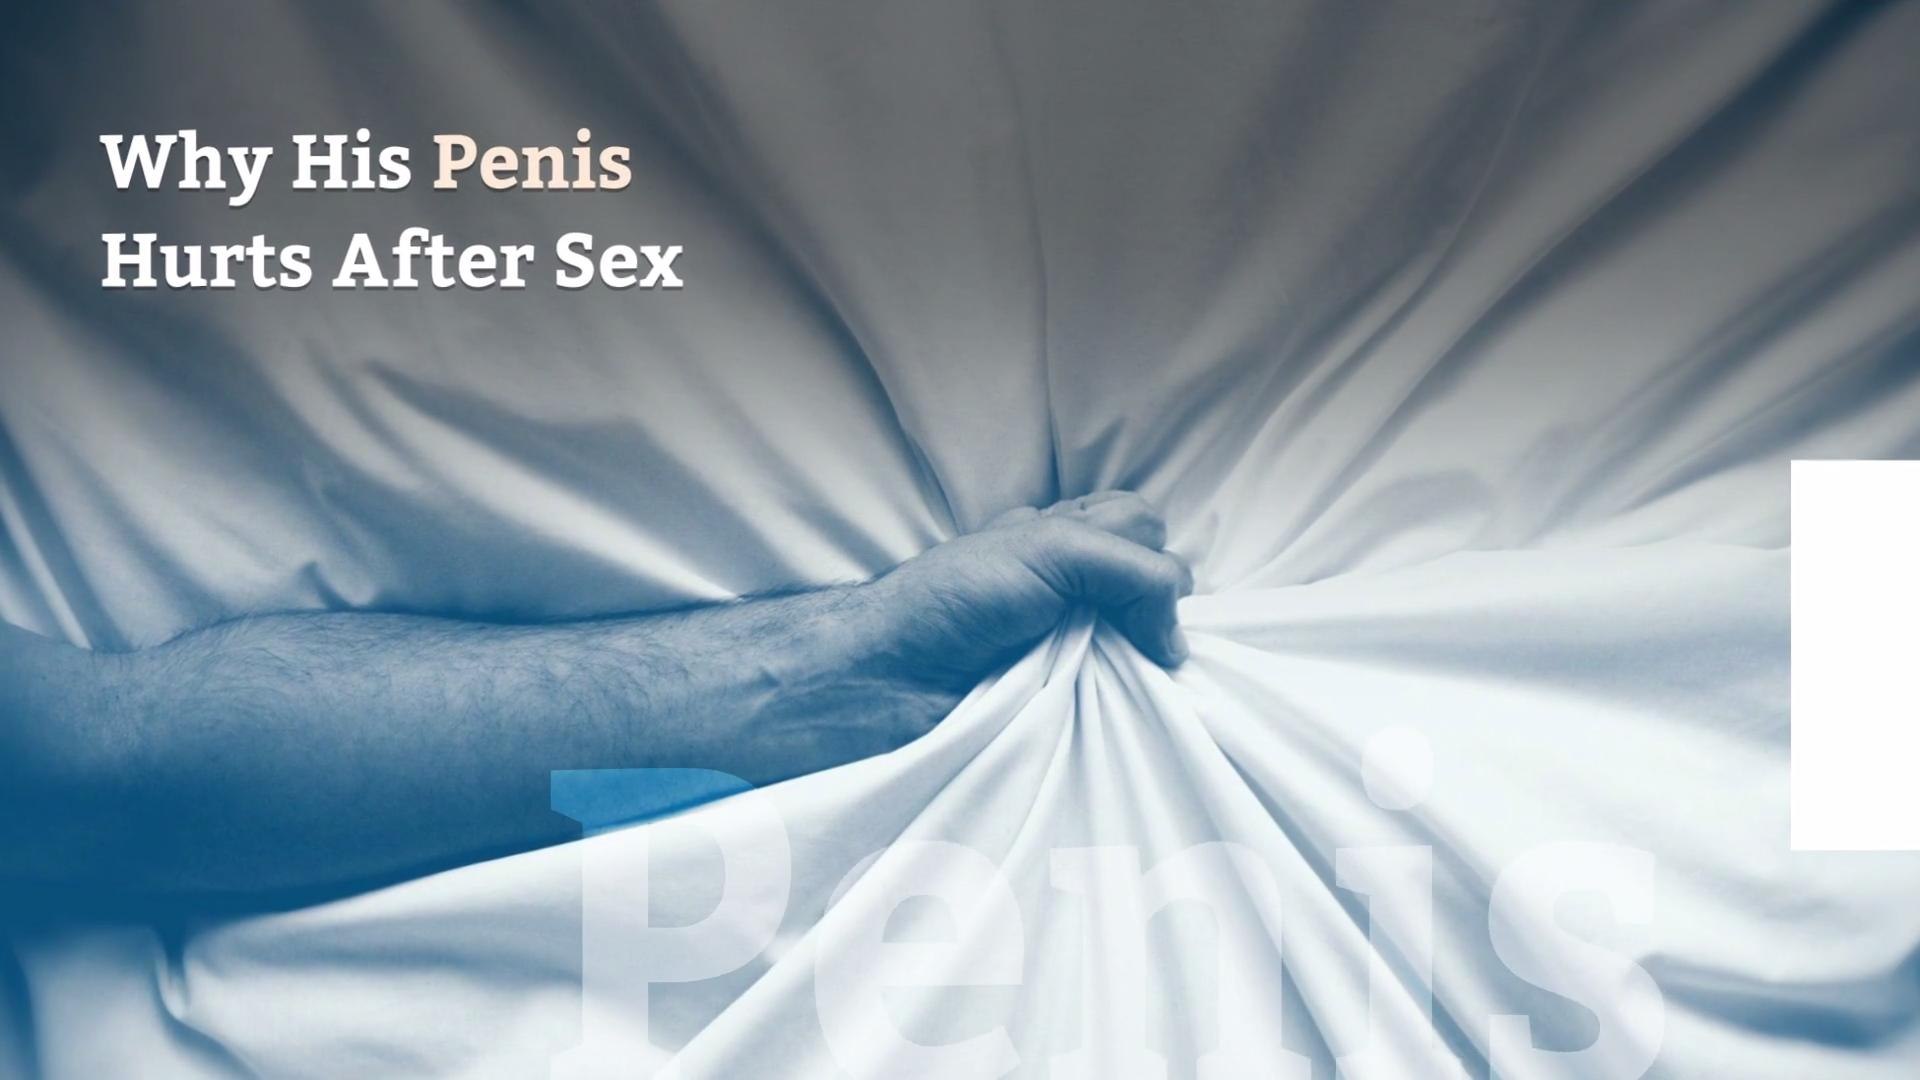 Penis hurt after sex - Full movie